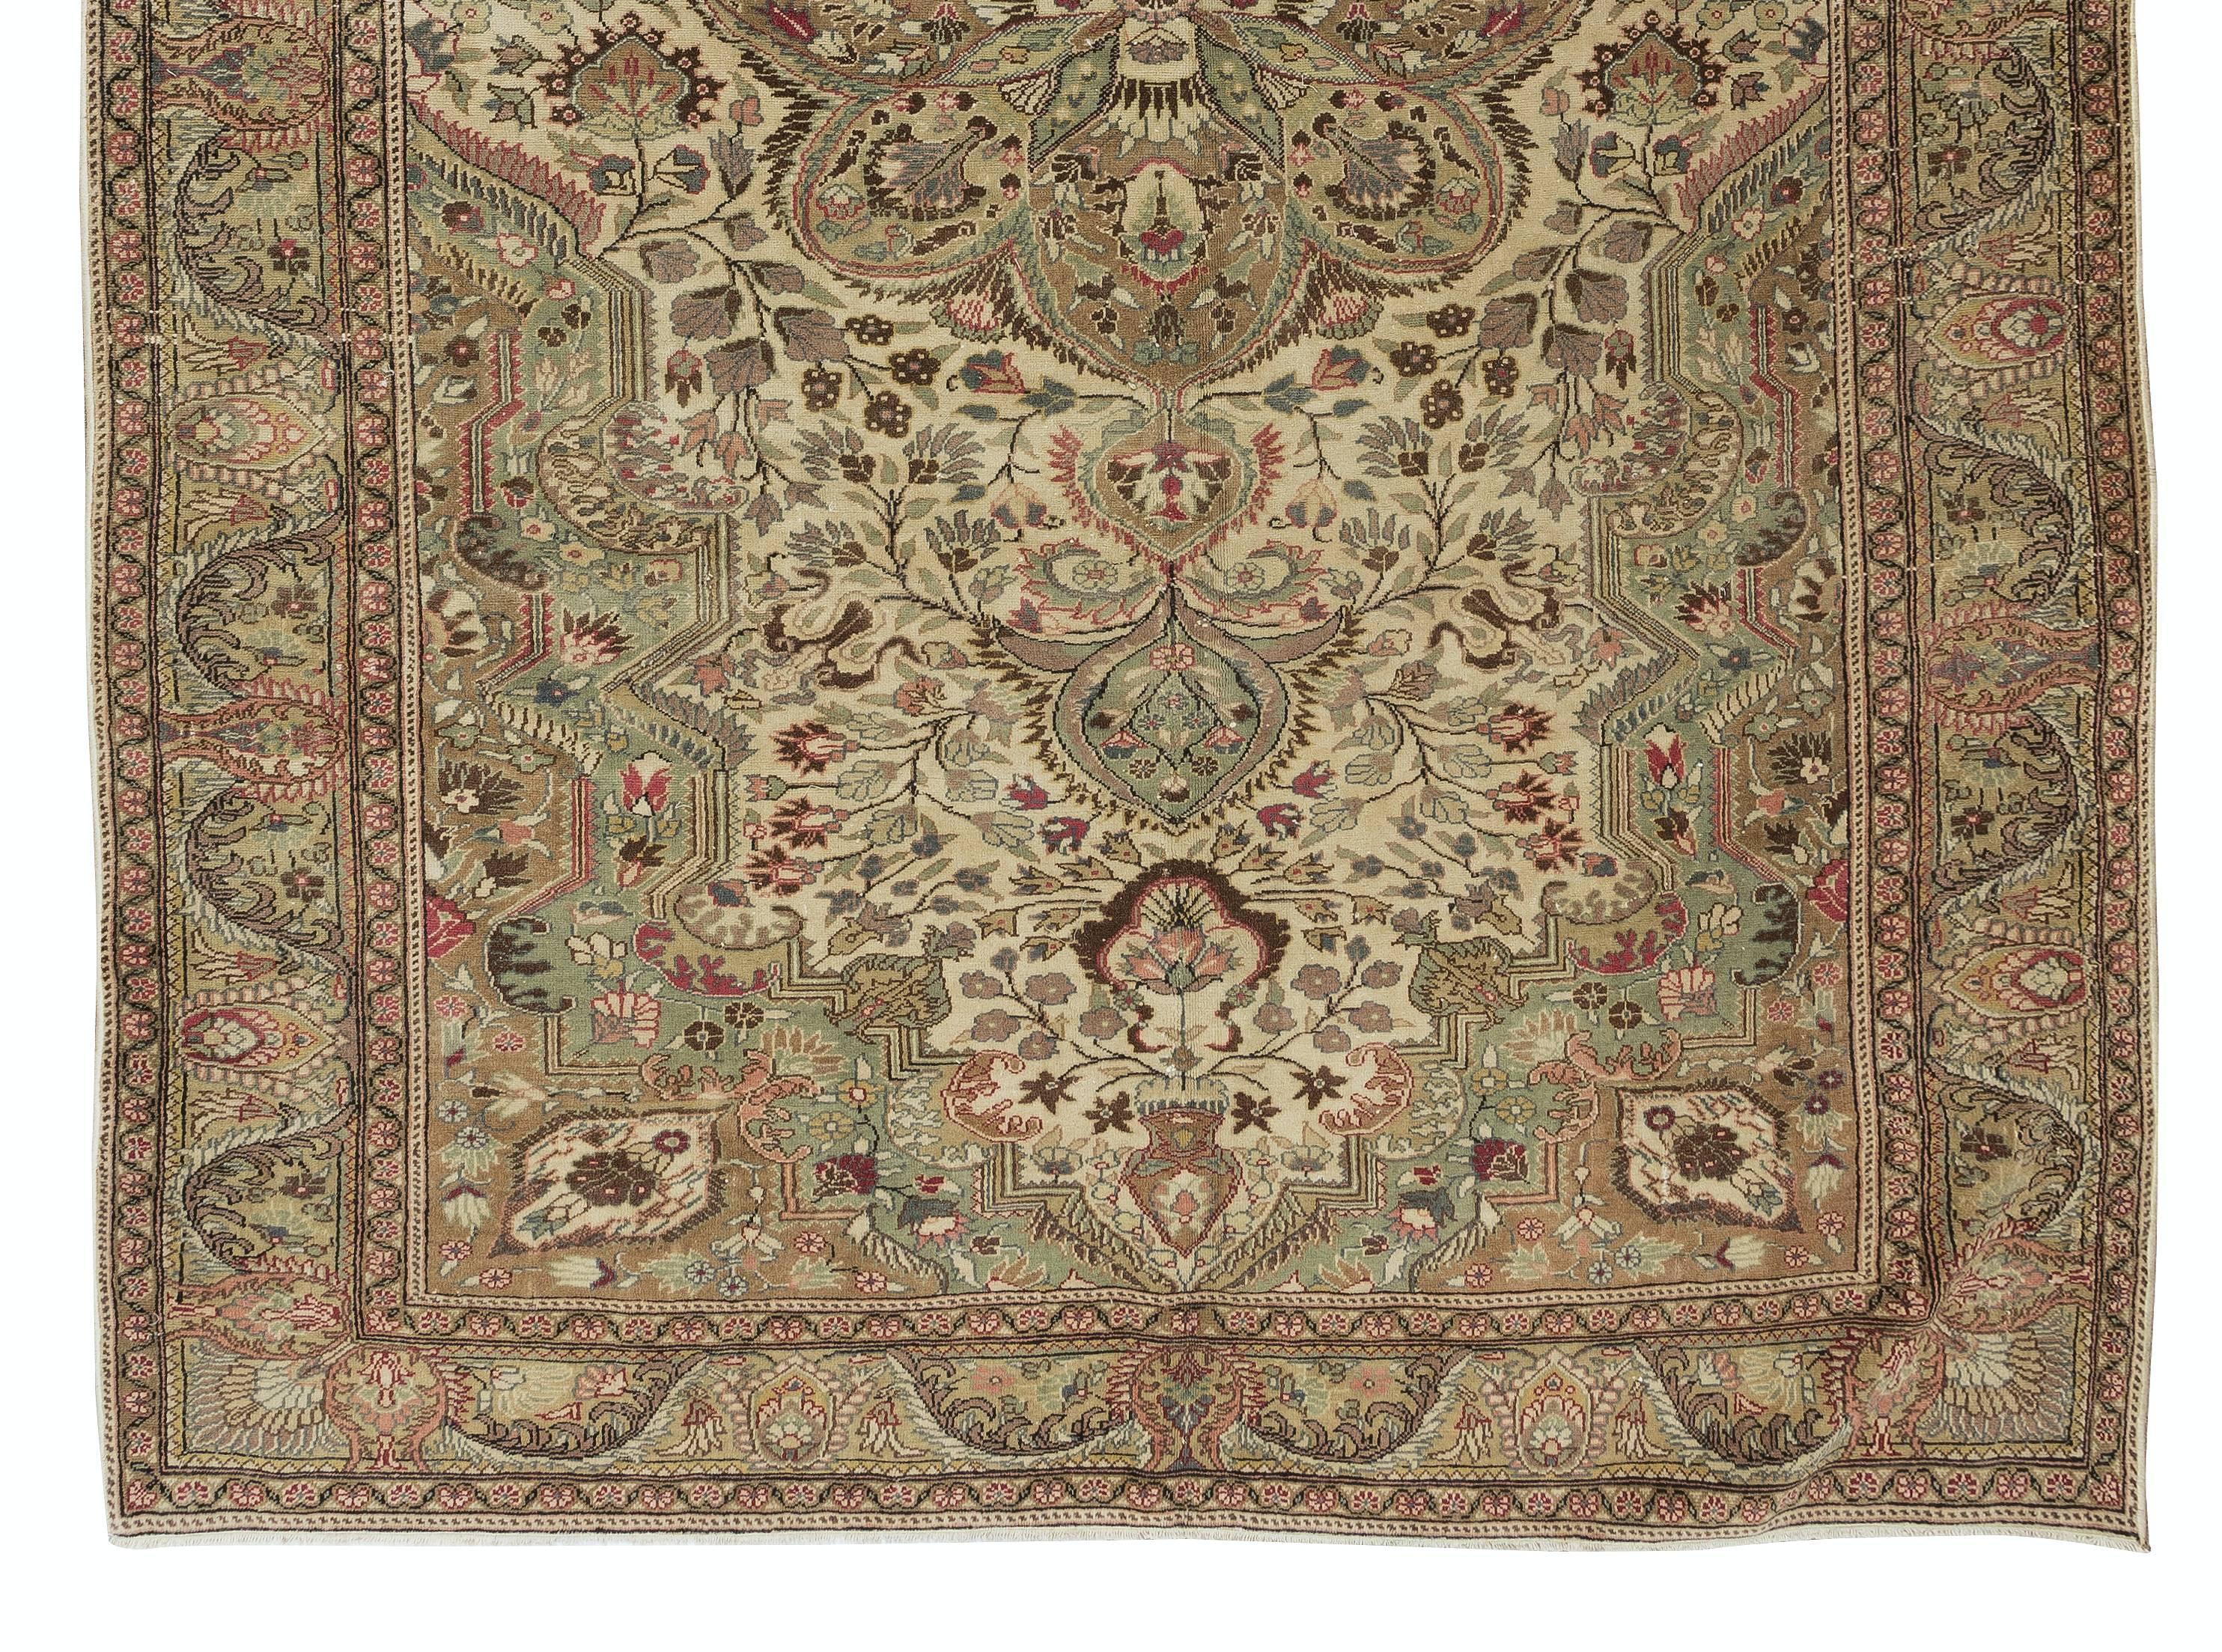 6.6x9.8 Ft Hand Knotted Vintage Turkish Kayseri Rug, Medallion Design, Wool Pile In Excellent Condition For Sale In Philadelphia, PA